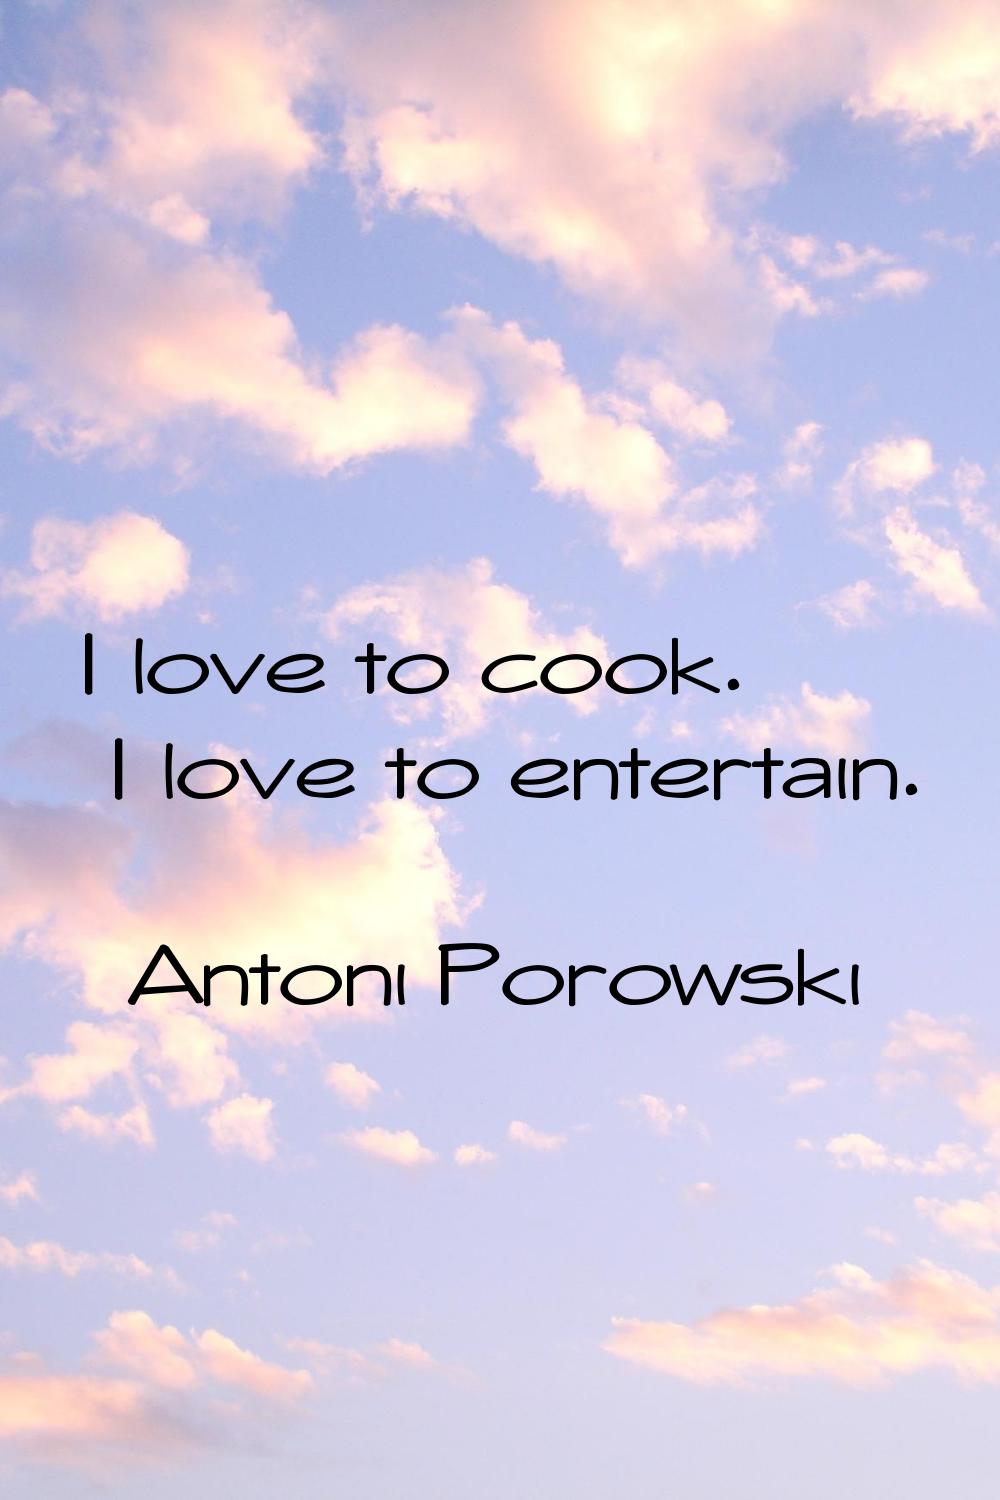 I love to cook. I love to entertain.